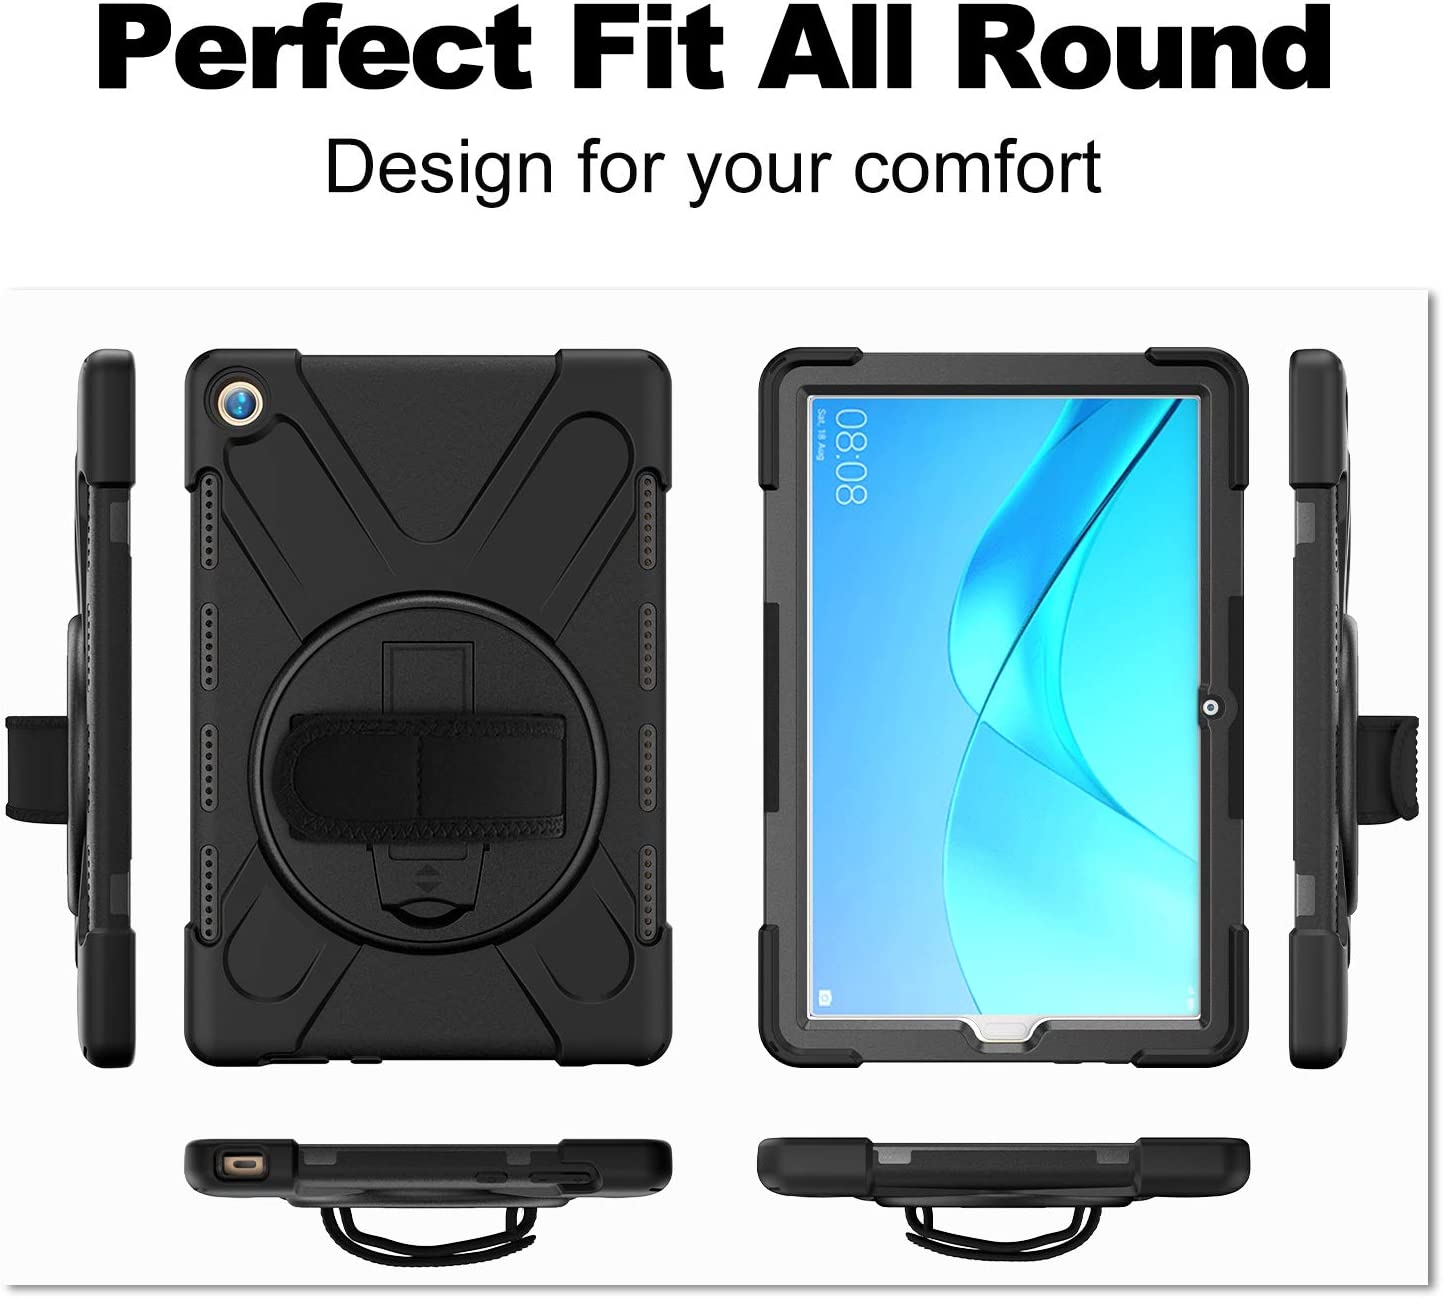 Case for Huawei MediaPad M5 10.8" & Huawei MediaPad M5 Pro 10.8", Military Grade [15 ft Drop Tested] Full-Body Shockproof Protective Cover with 360? Rotation Stand & Hand Strap (Black)